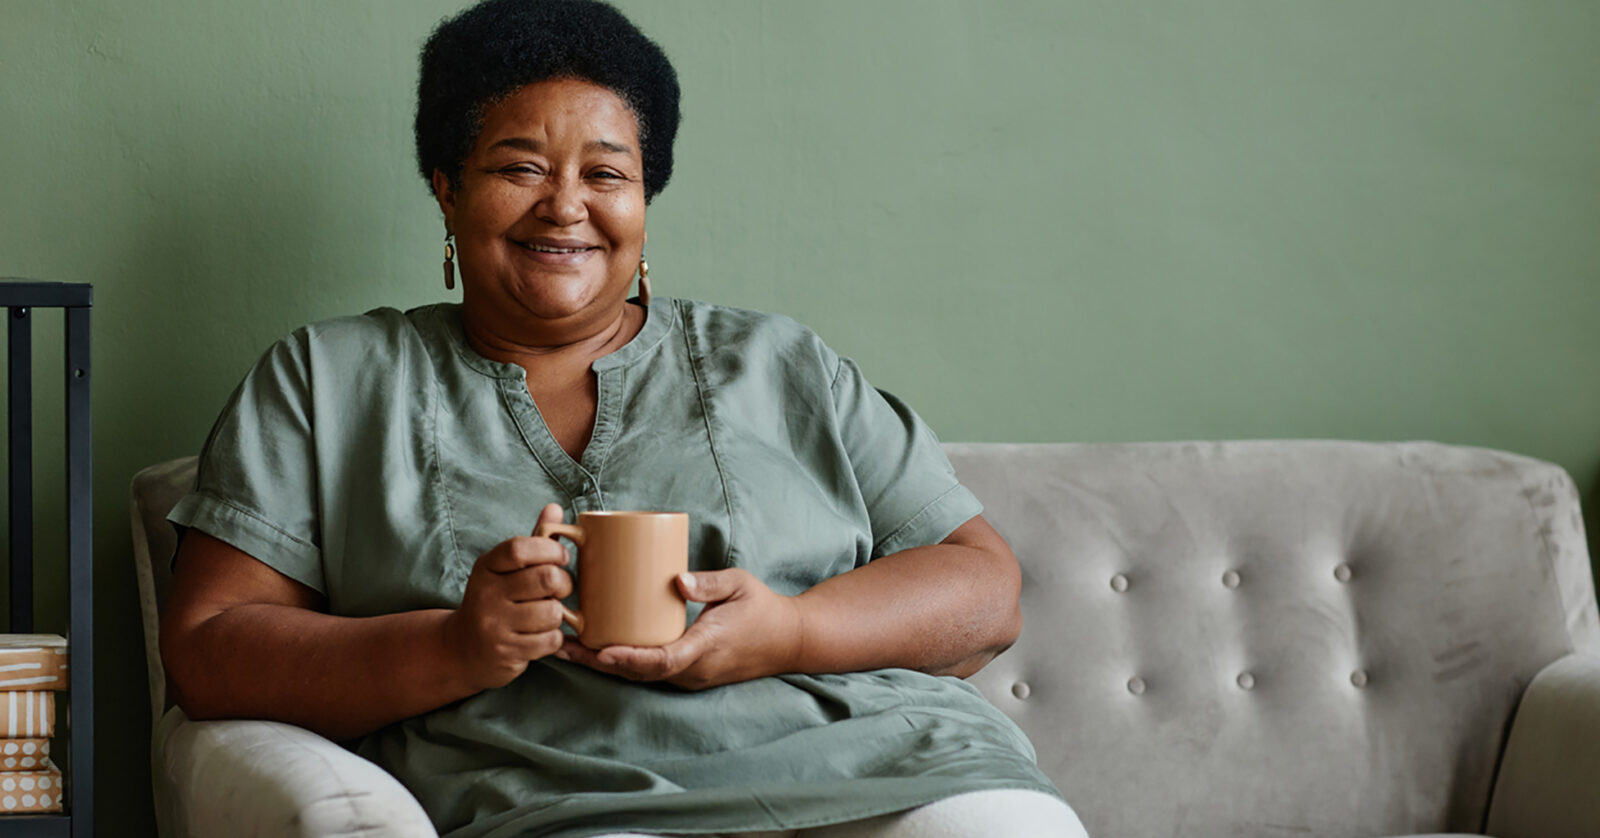 smiling woman on couch with coffee mug